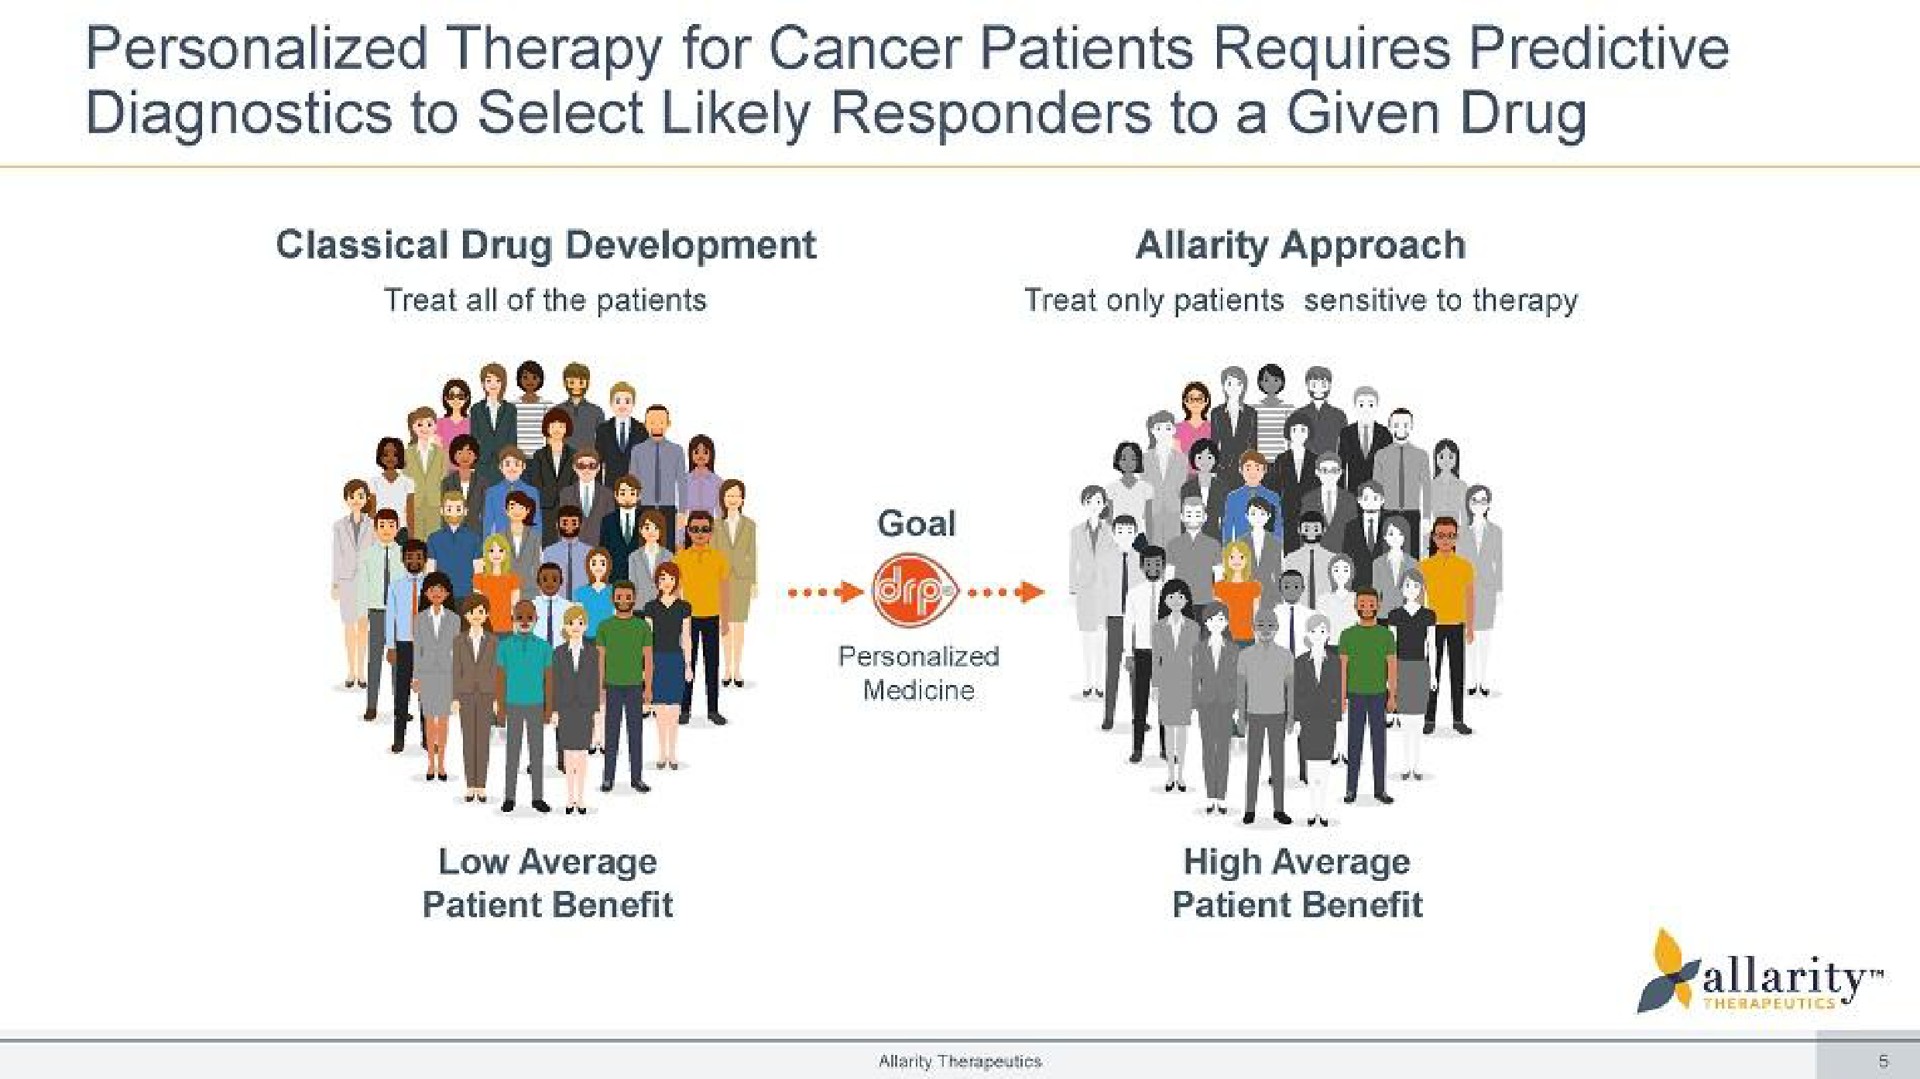 personalized therapy for cancer patients requires predictive diagnostics to select likely responders to a given drug | Allarity Therapeutics